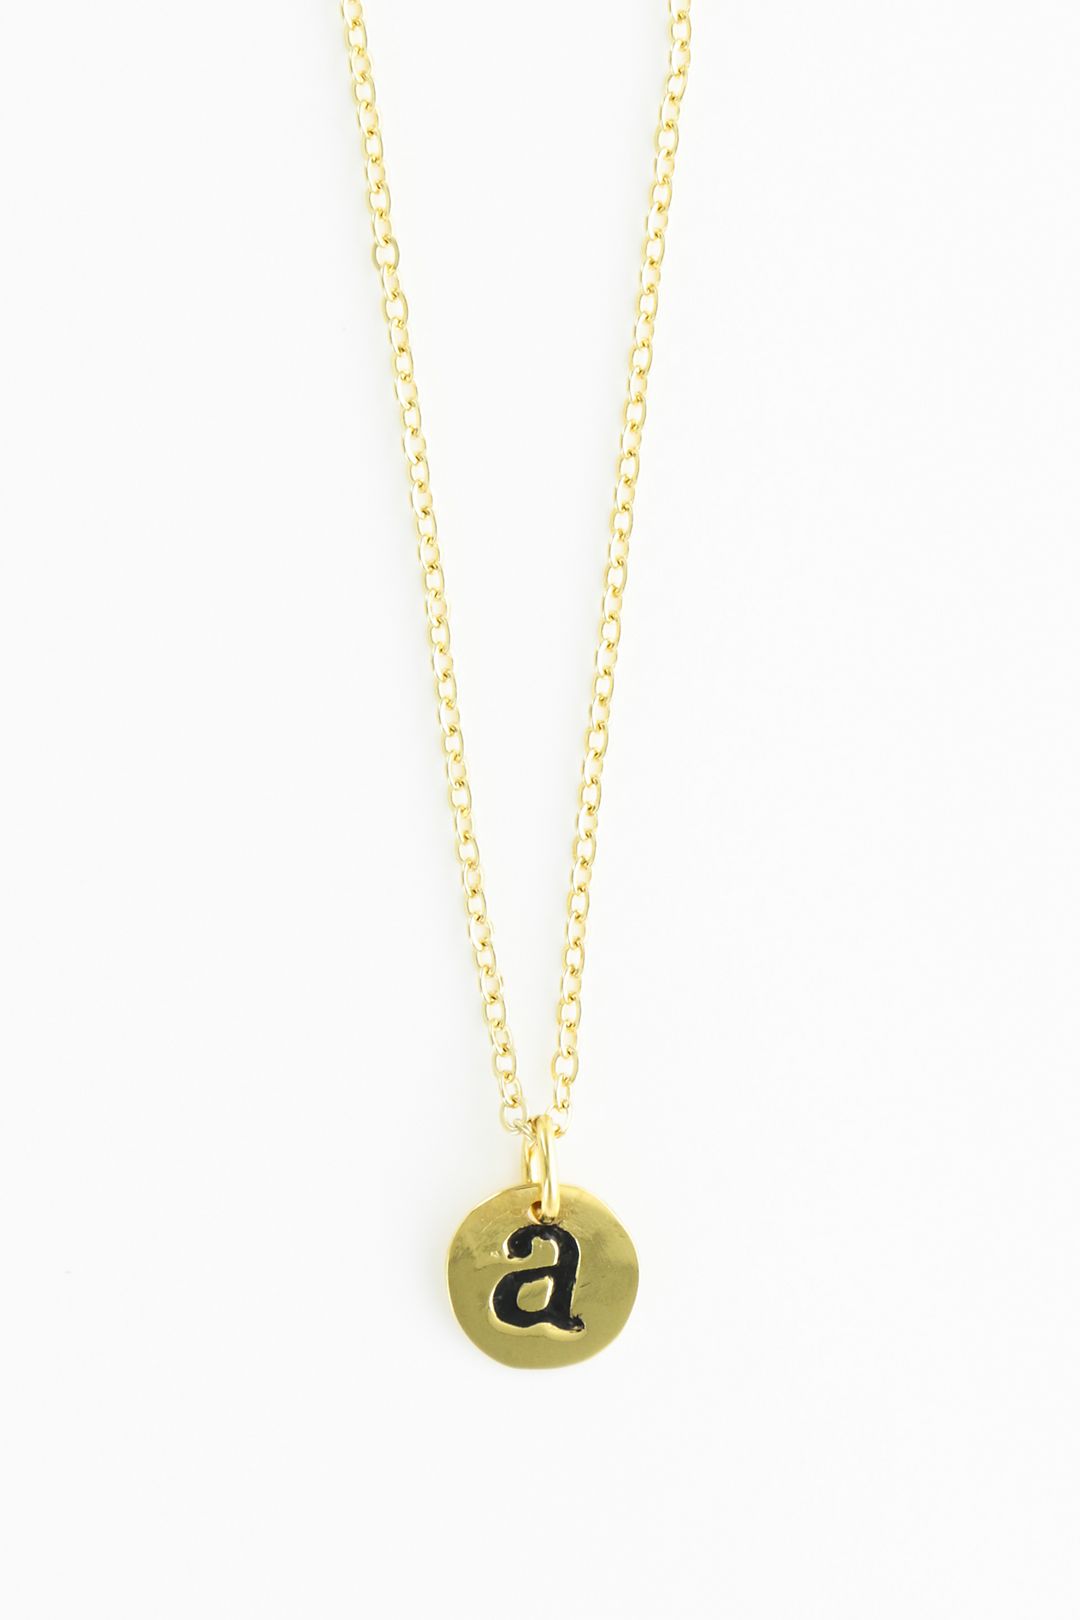 Personalized Initial Gold-Plated Necklace Image 2